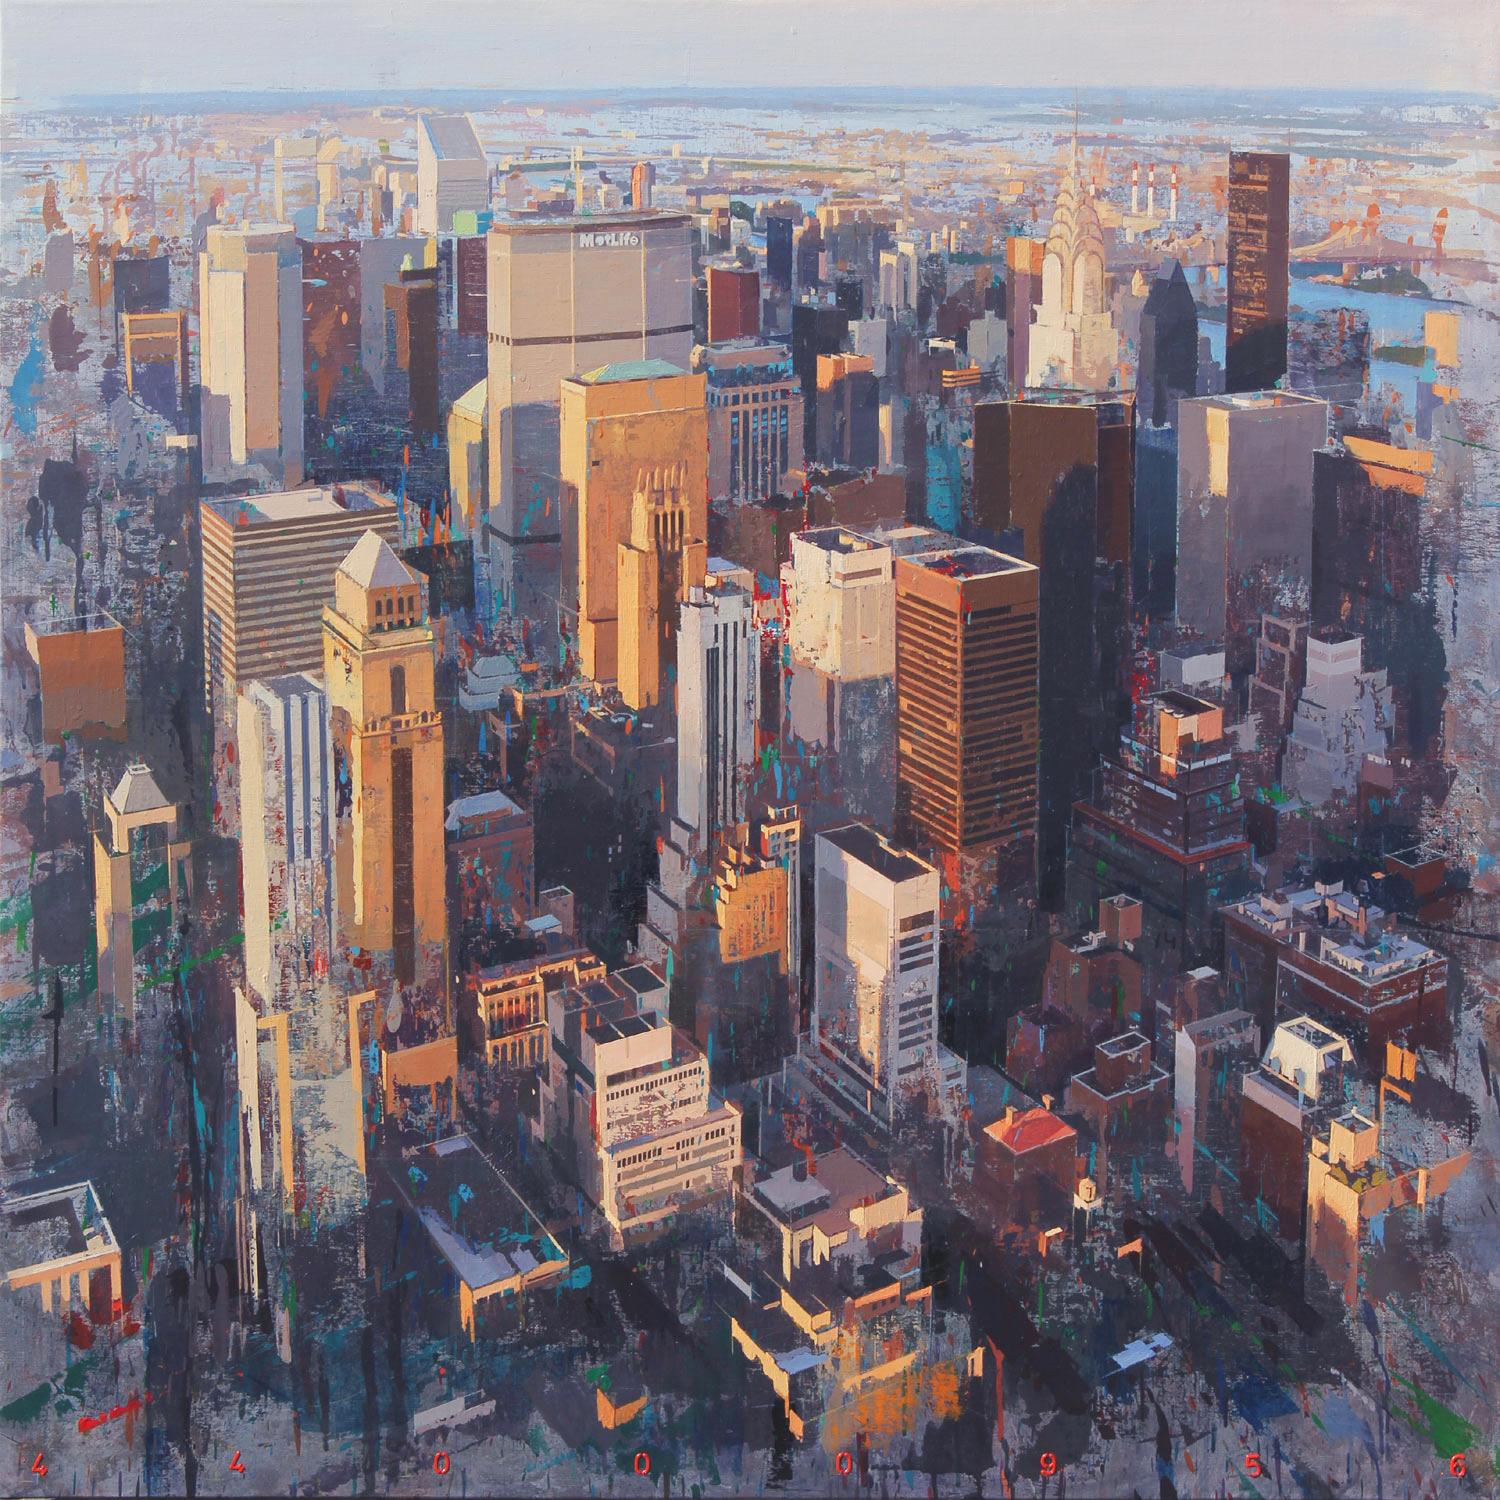 Life - New York City Original Aerial View Oil Painting on Canvas by Albert Vidal